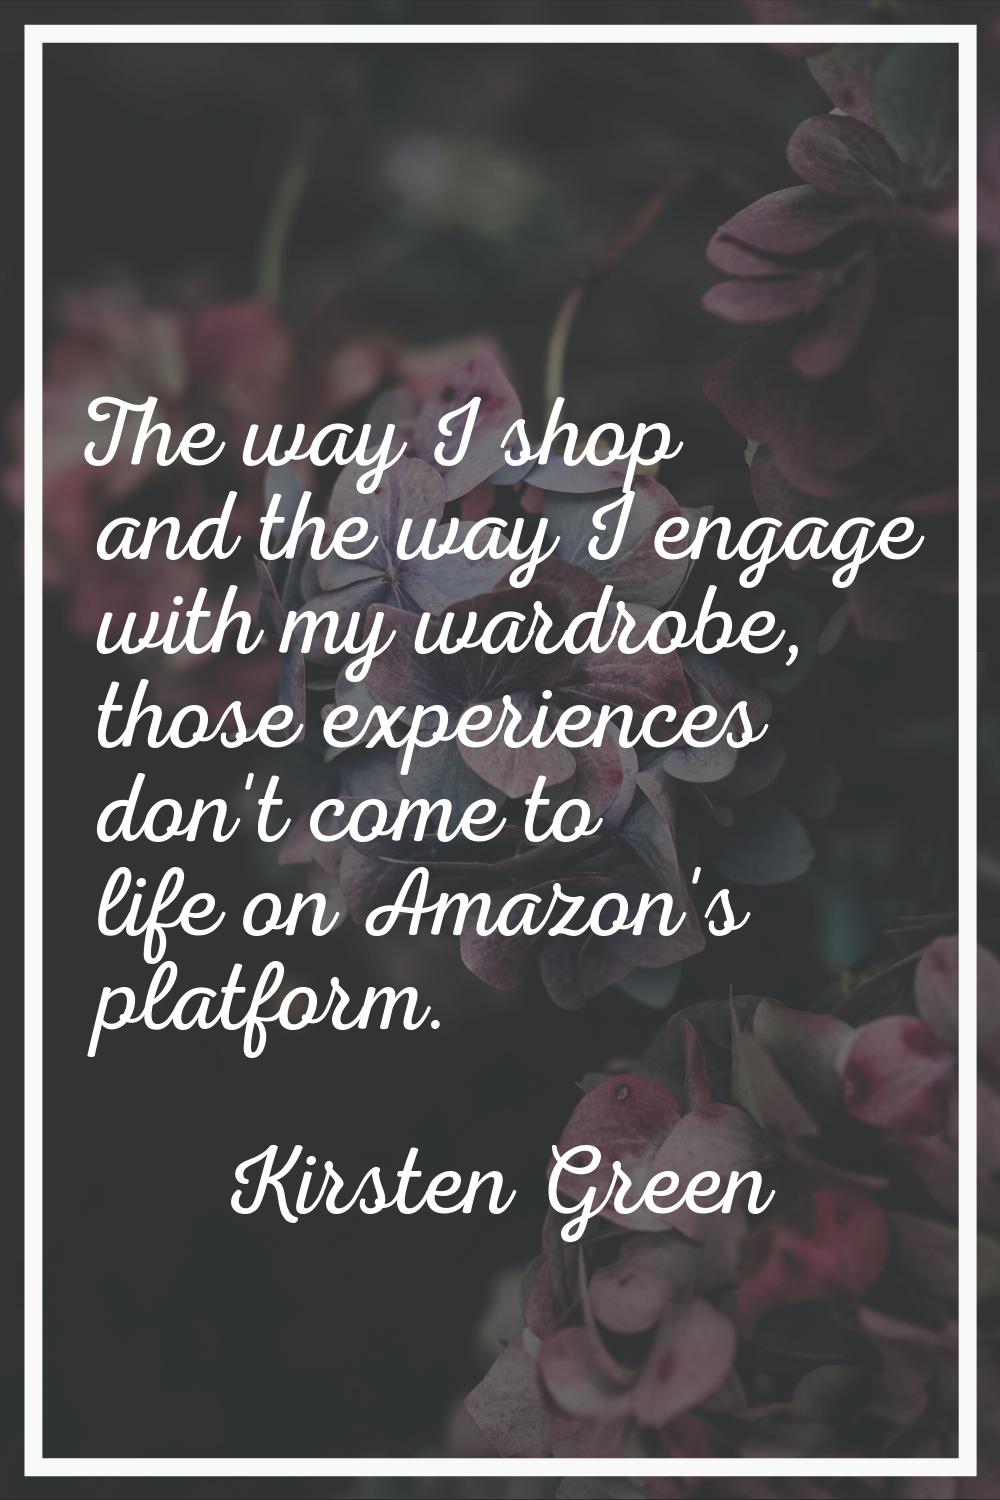 The way I shop and the way I engage with my wardrobe, those experiences don't come to life on Amazo